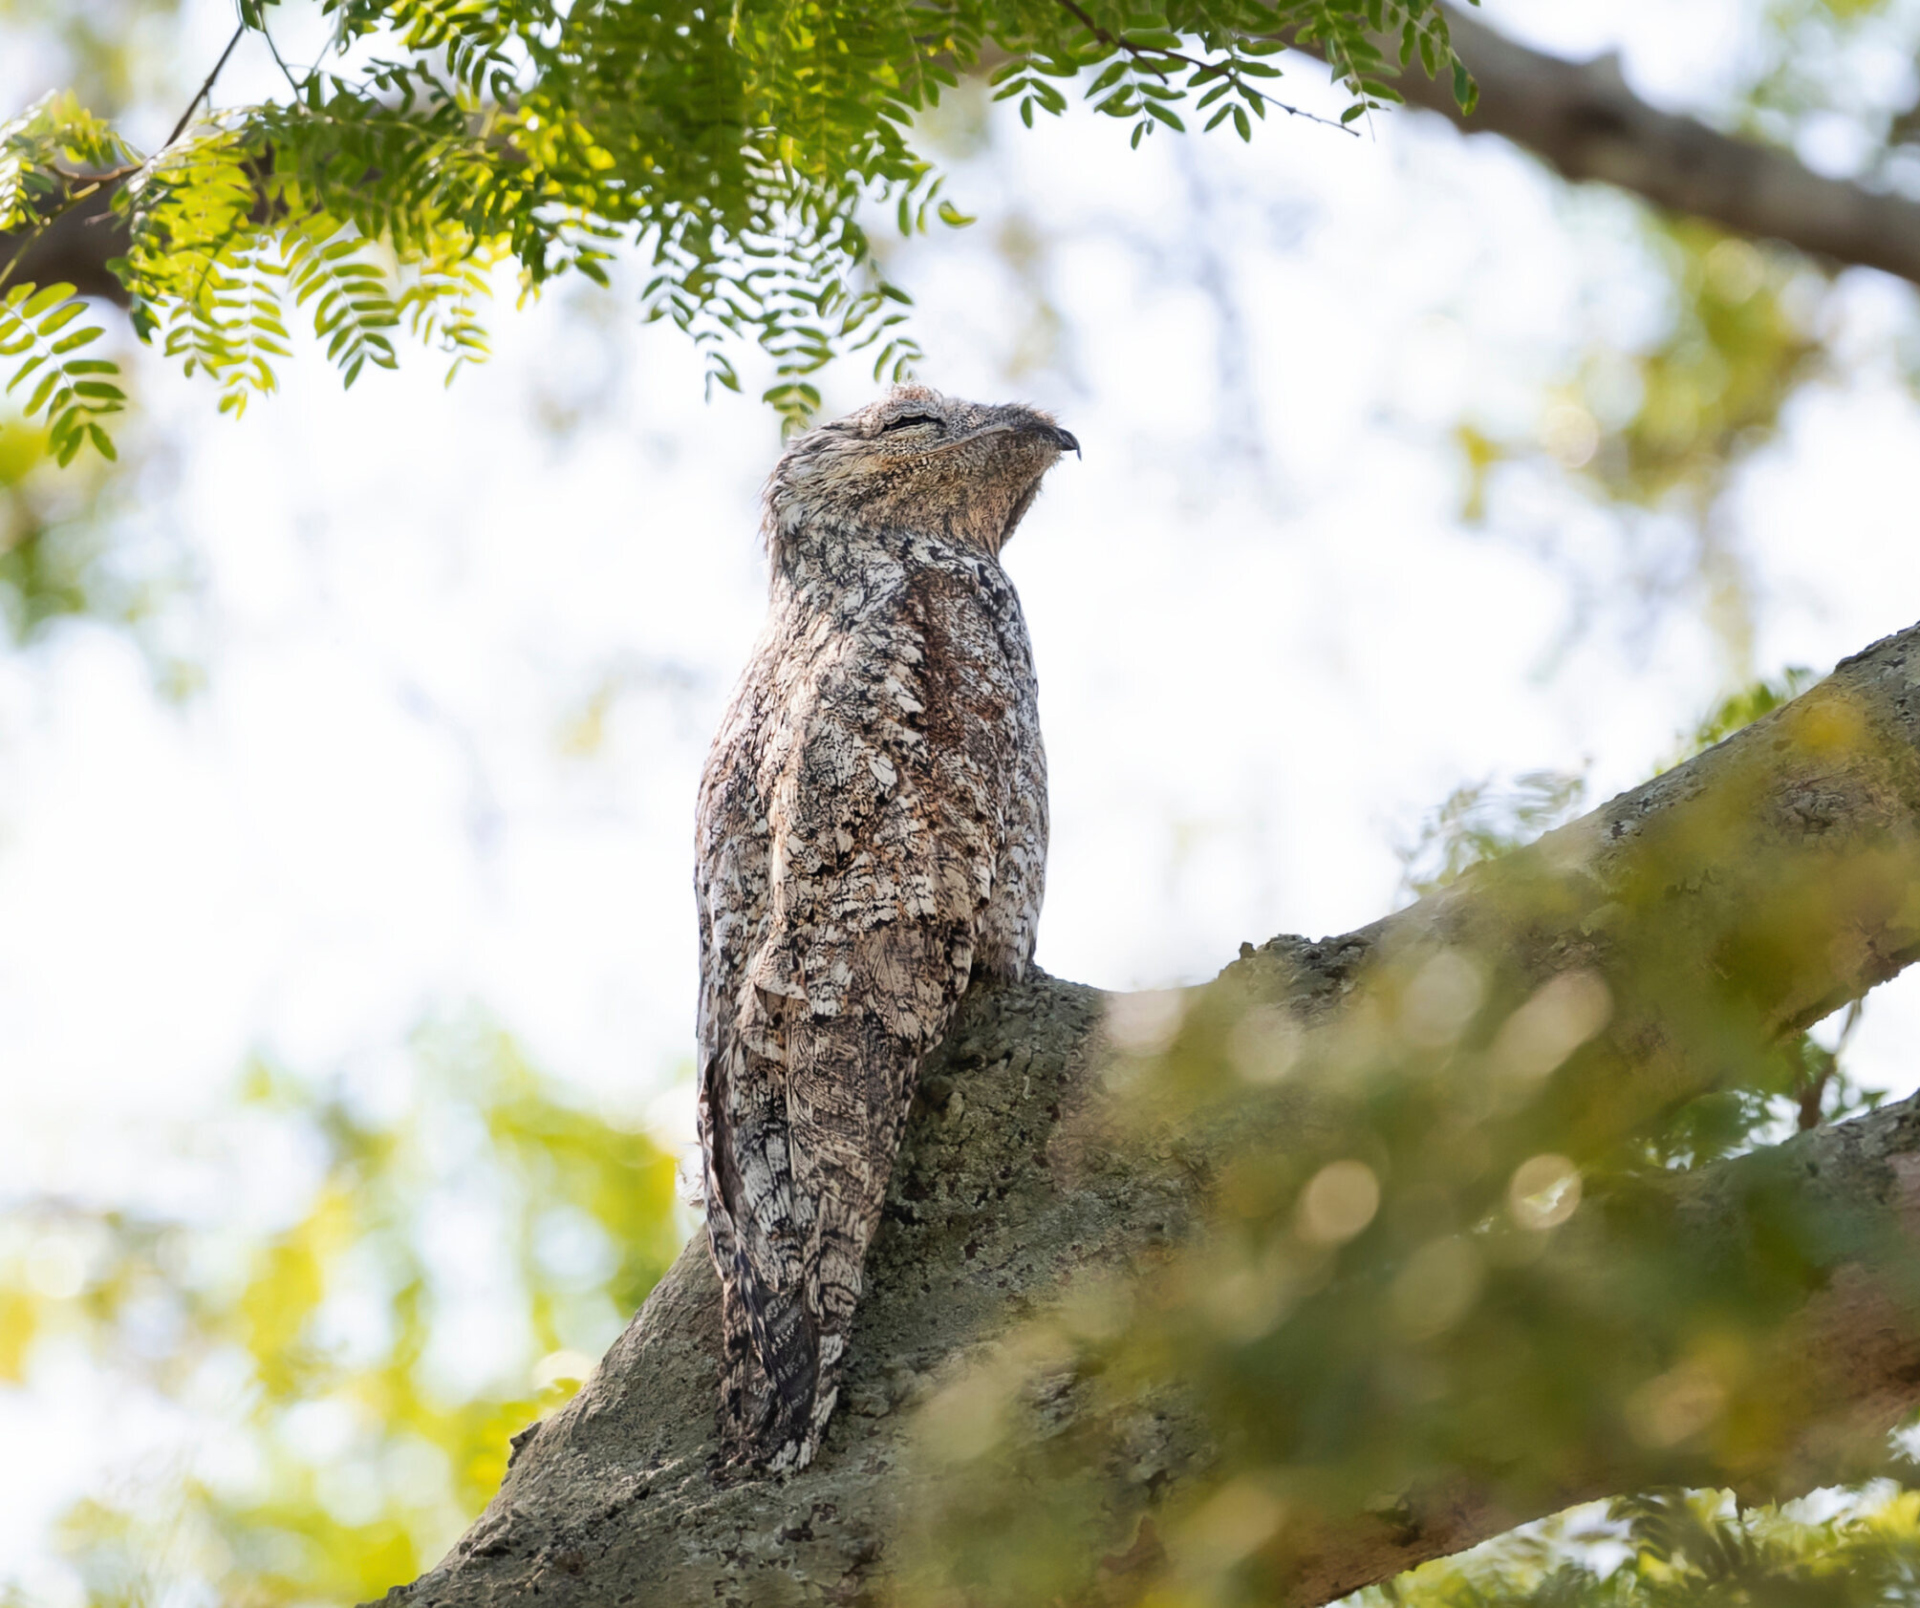 Close up of a great potoo perched in a tree in Brazil